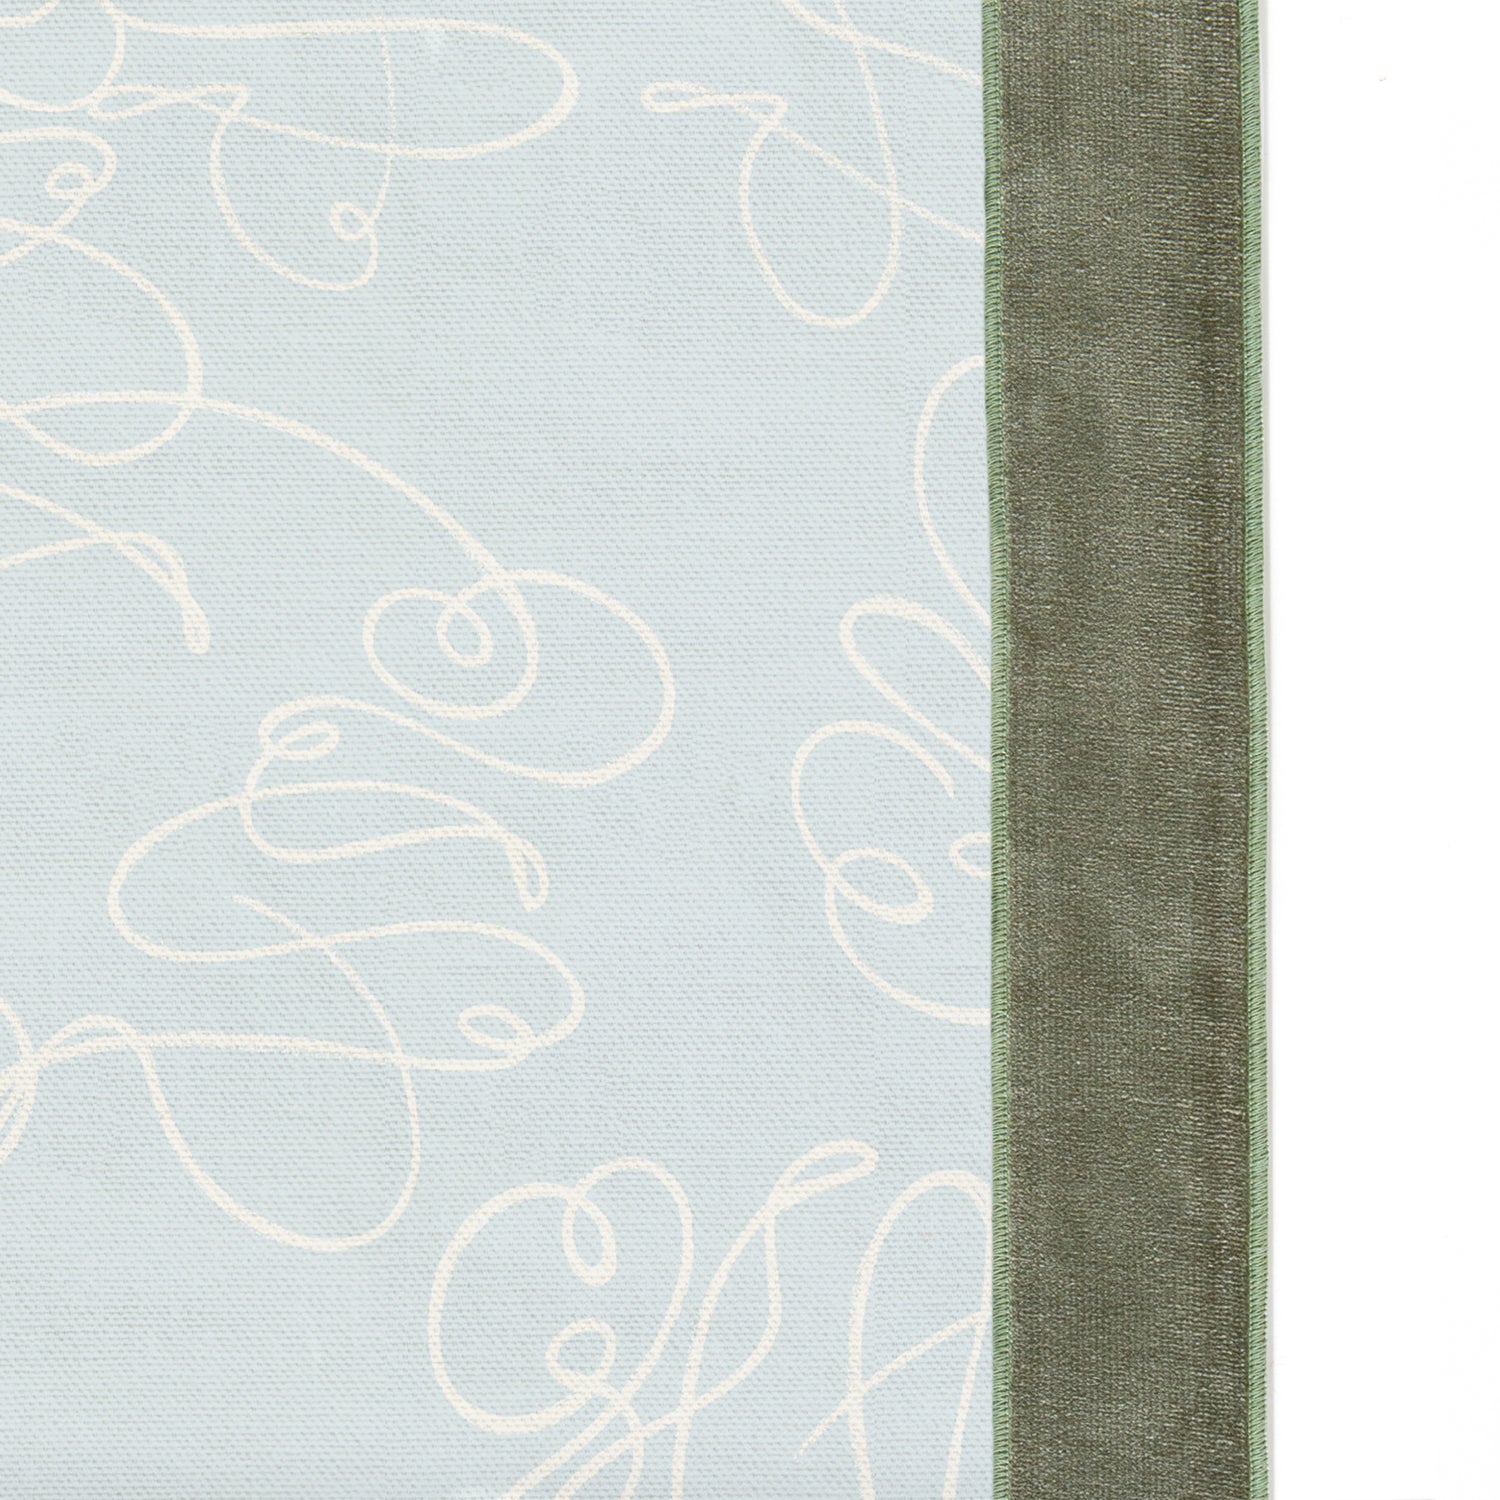 Upclose picture of Mirabella custom Powder Blue Abstractshower curtain with fern velvet band trim